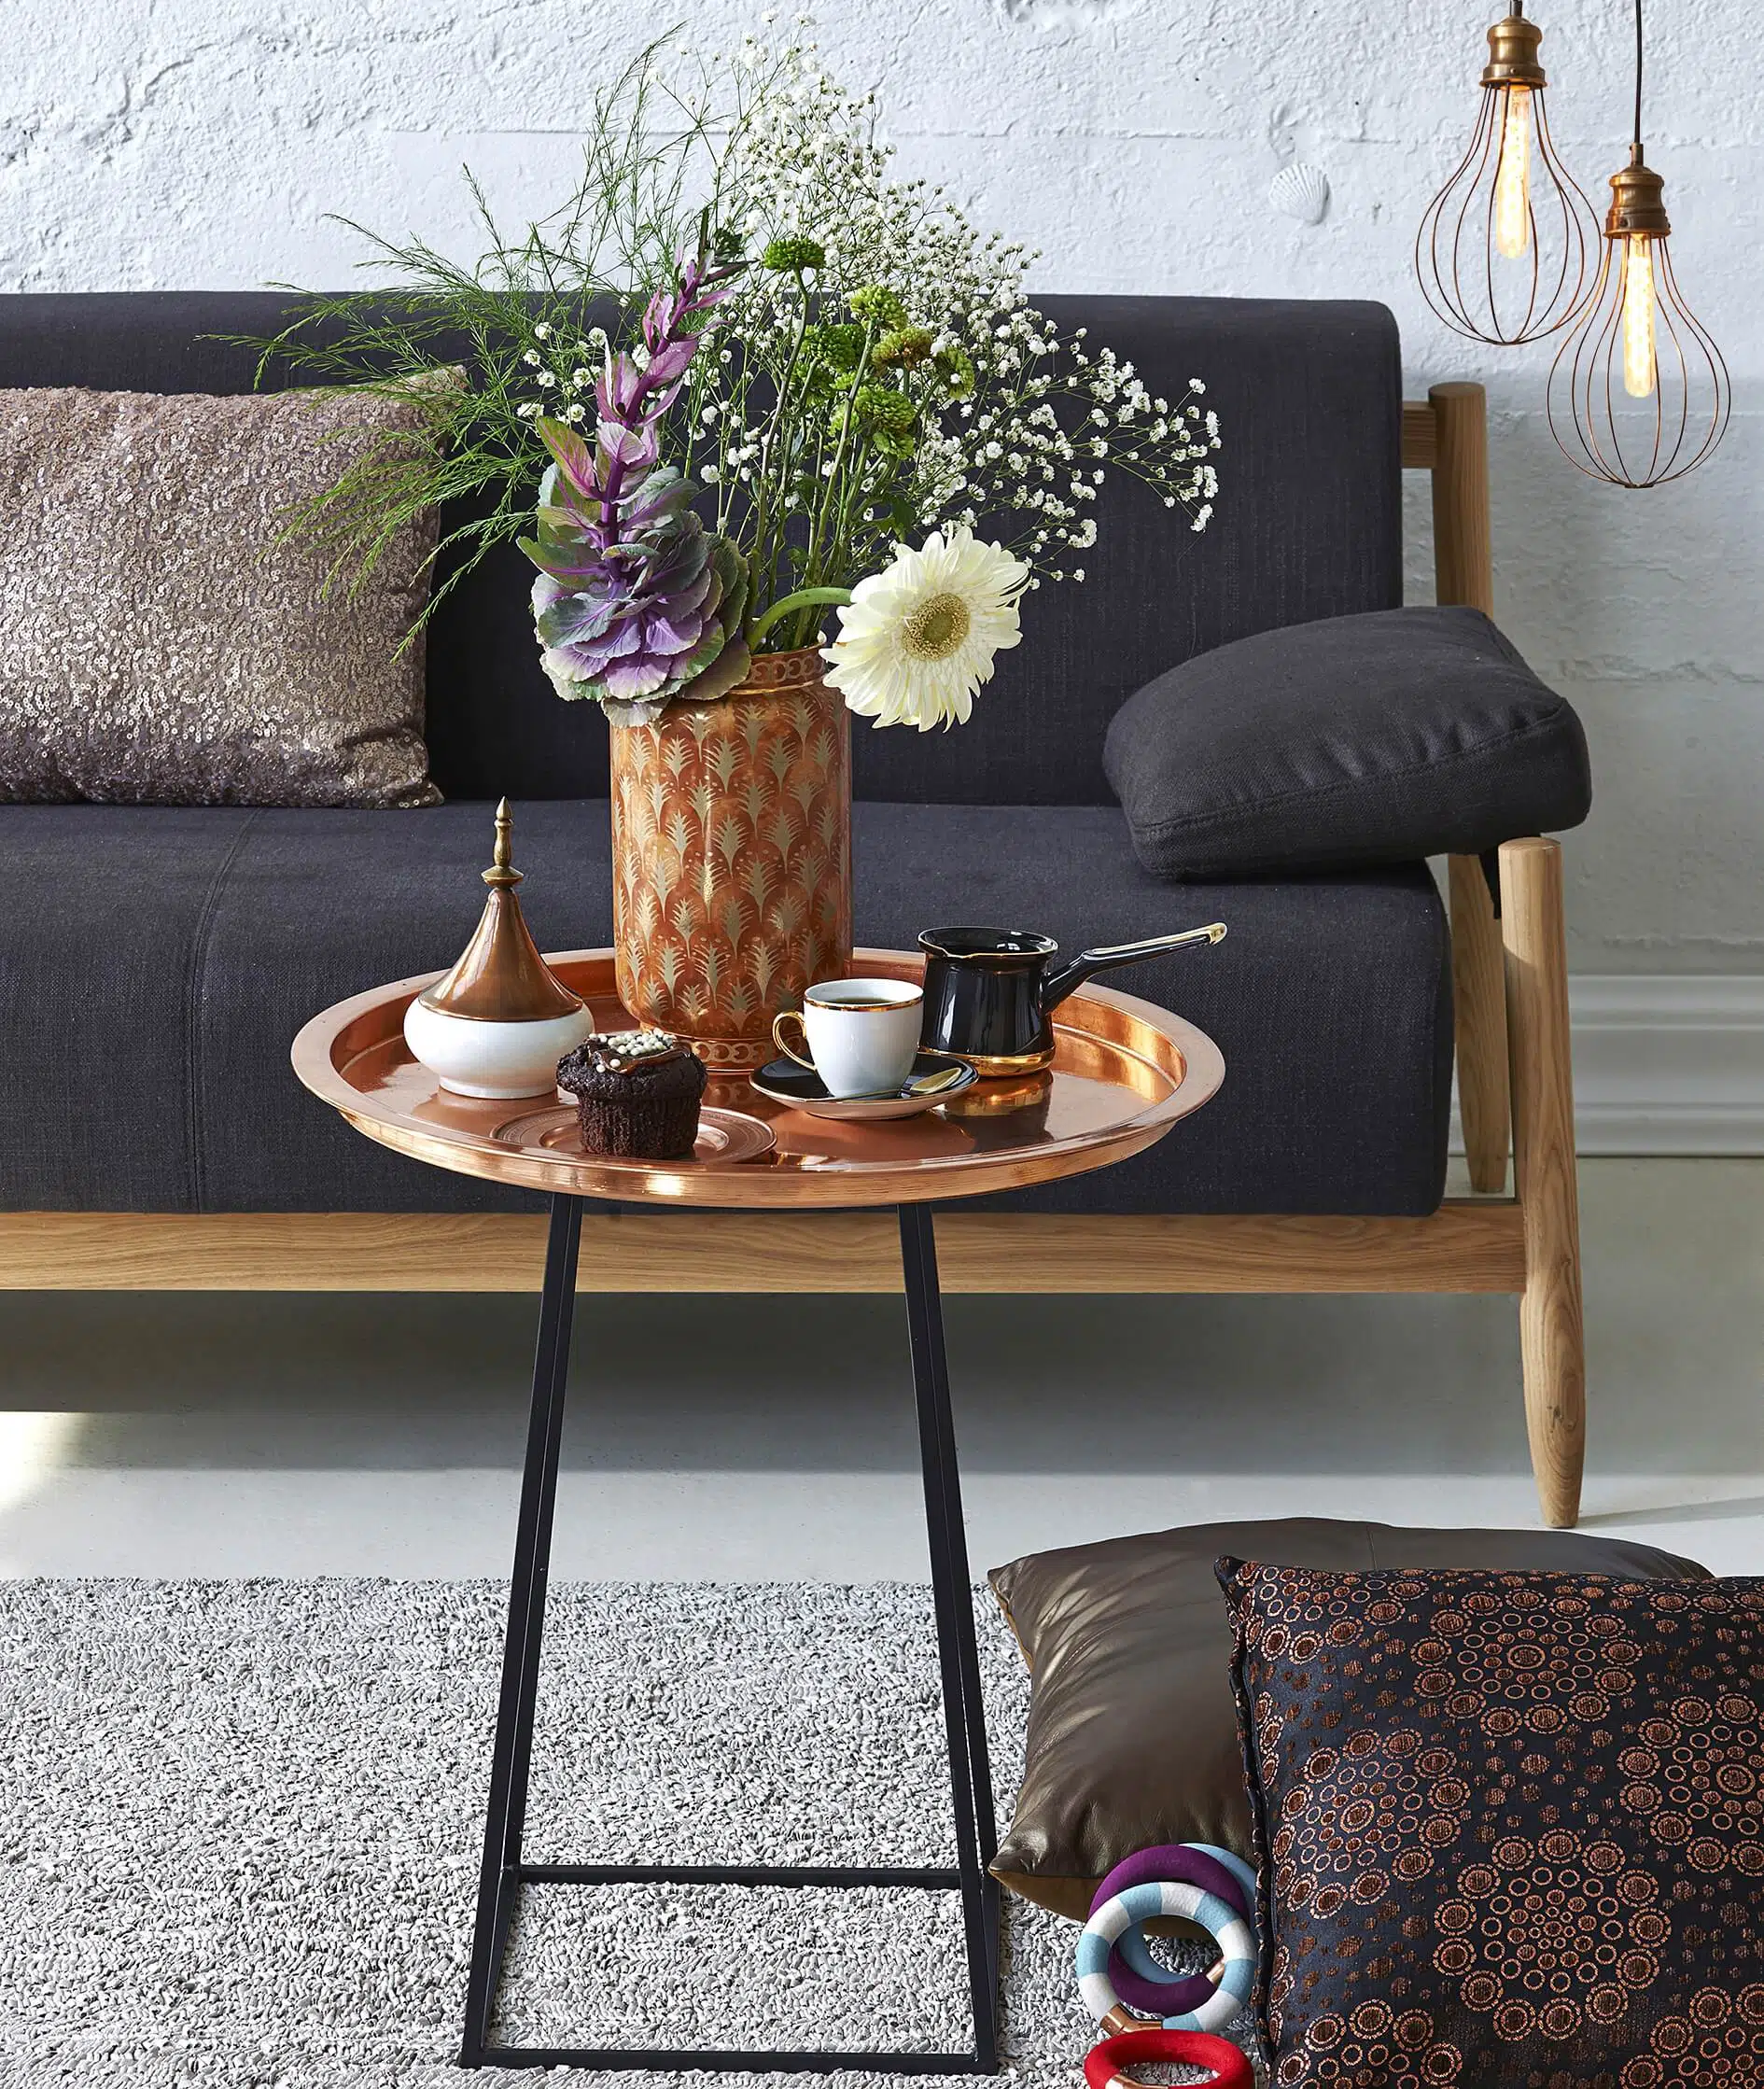 Copper coffee table, sofa, modern lamp, and throw pillows on the carpet of a living room